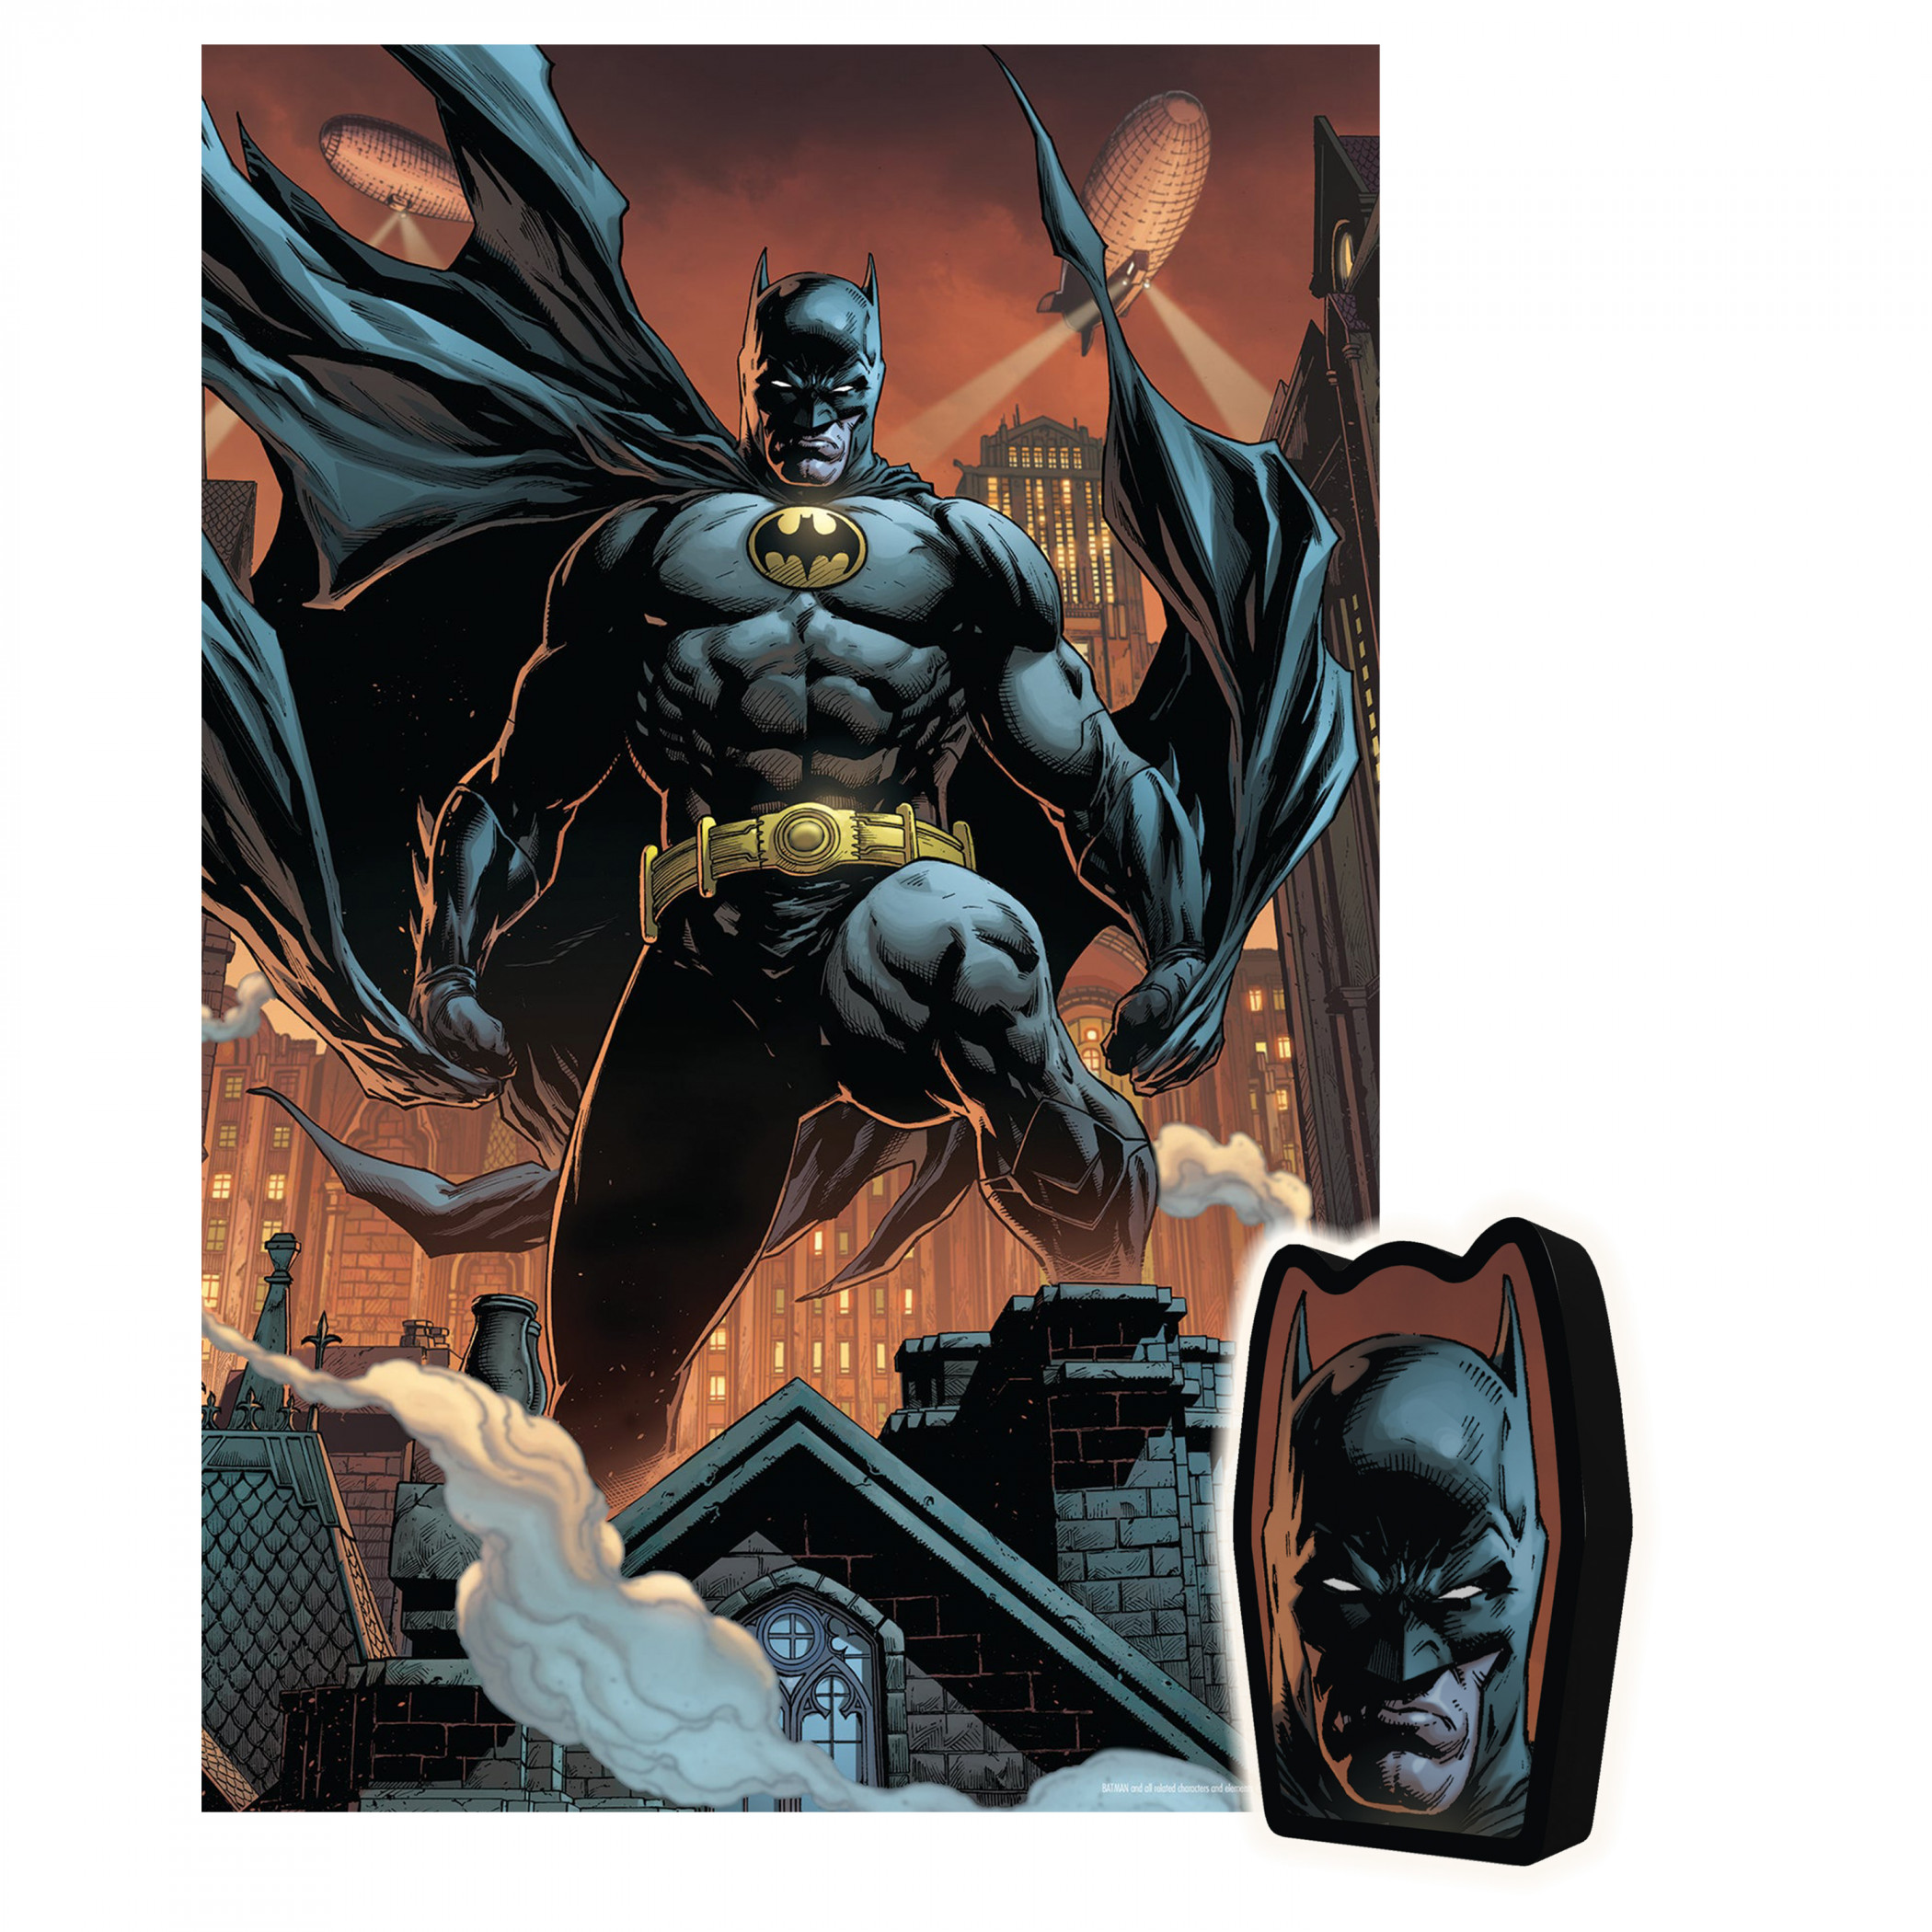 Batman Over the City 3D Lenticular 300pc Jigsaw Puzzle in Collectors Tin